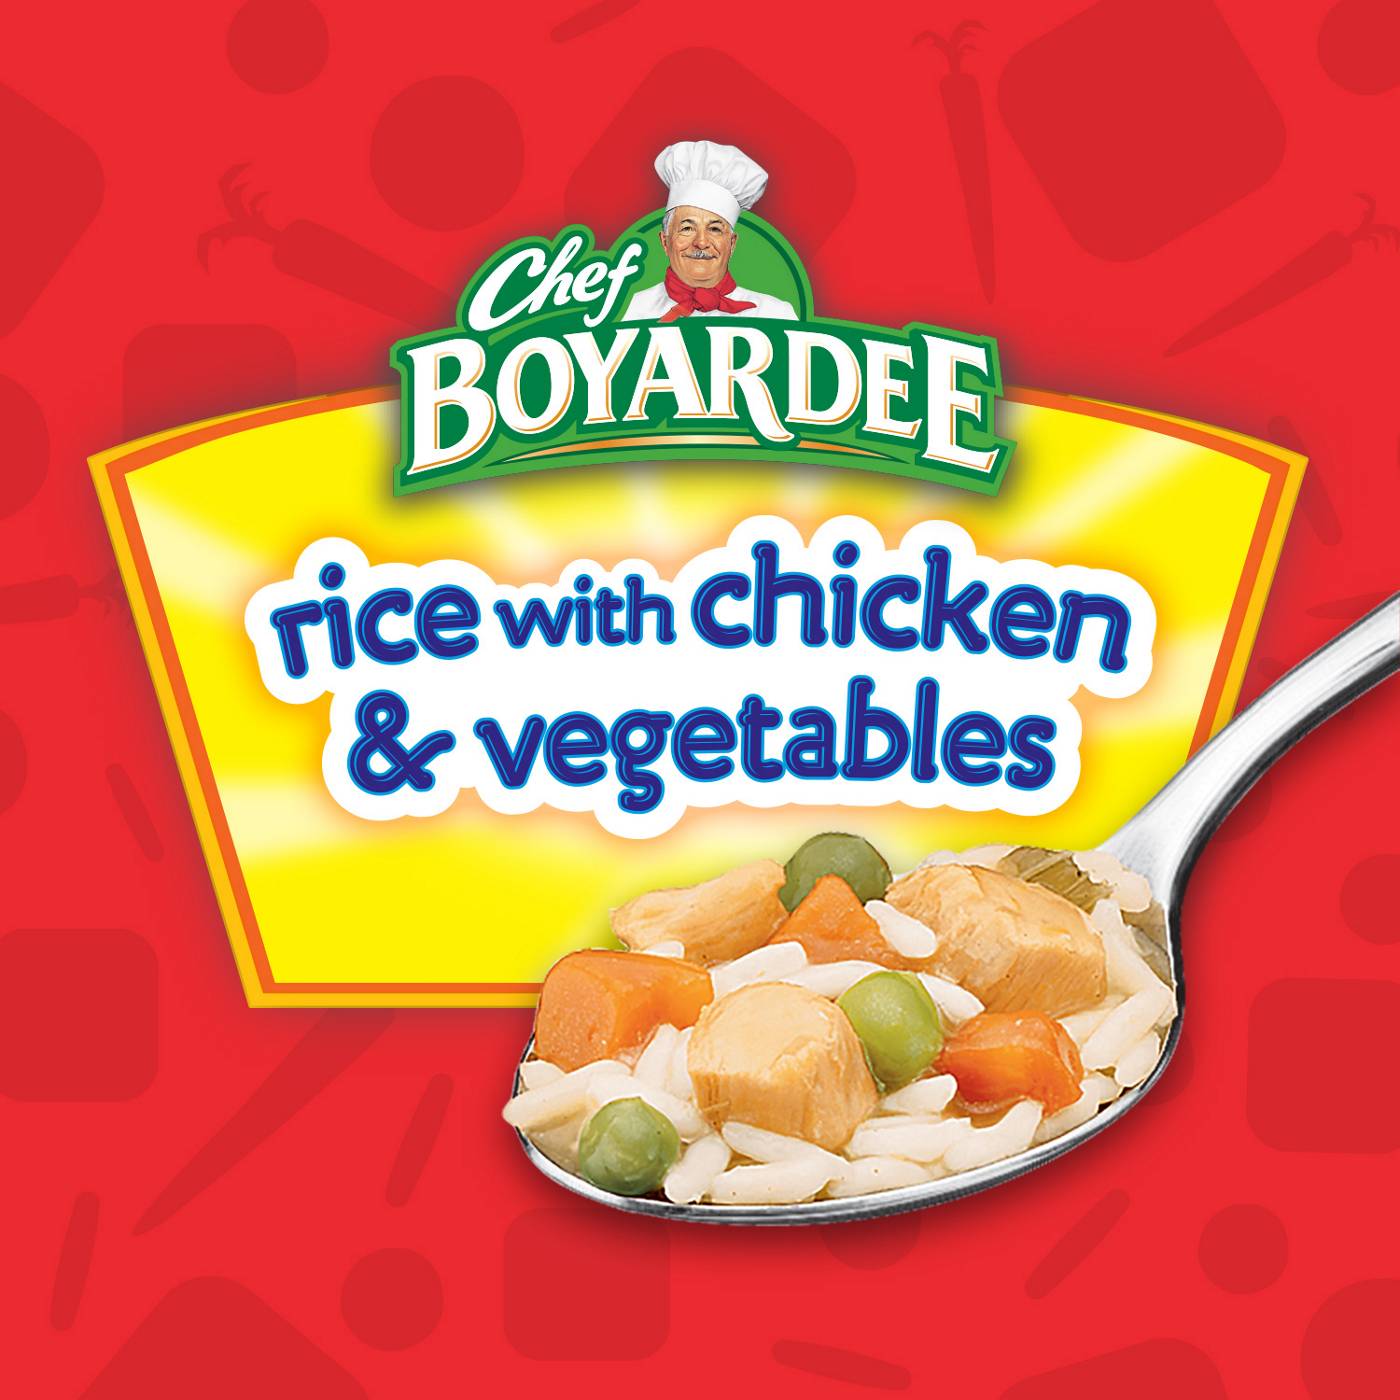 Chef Boyardee Rice with Chicken & Vegetables; image 6 of 7